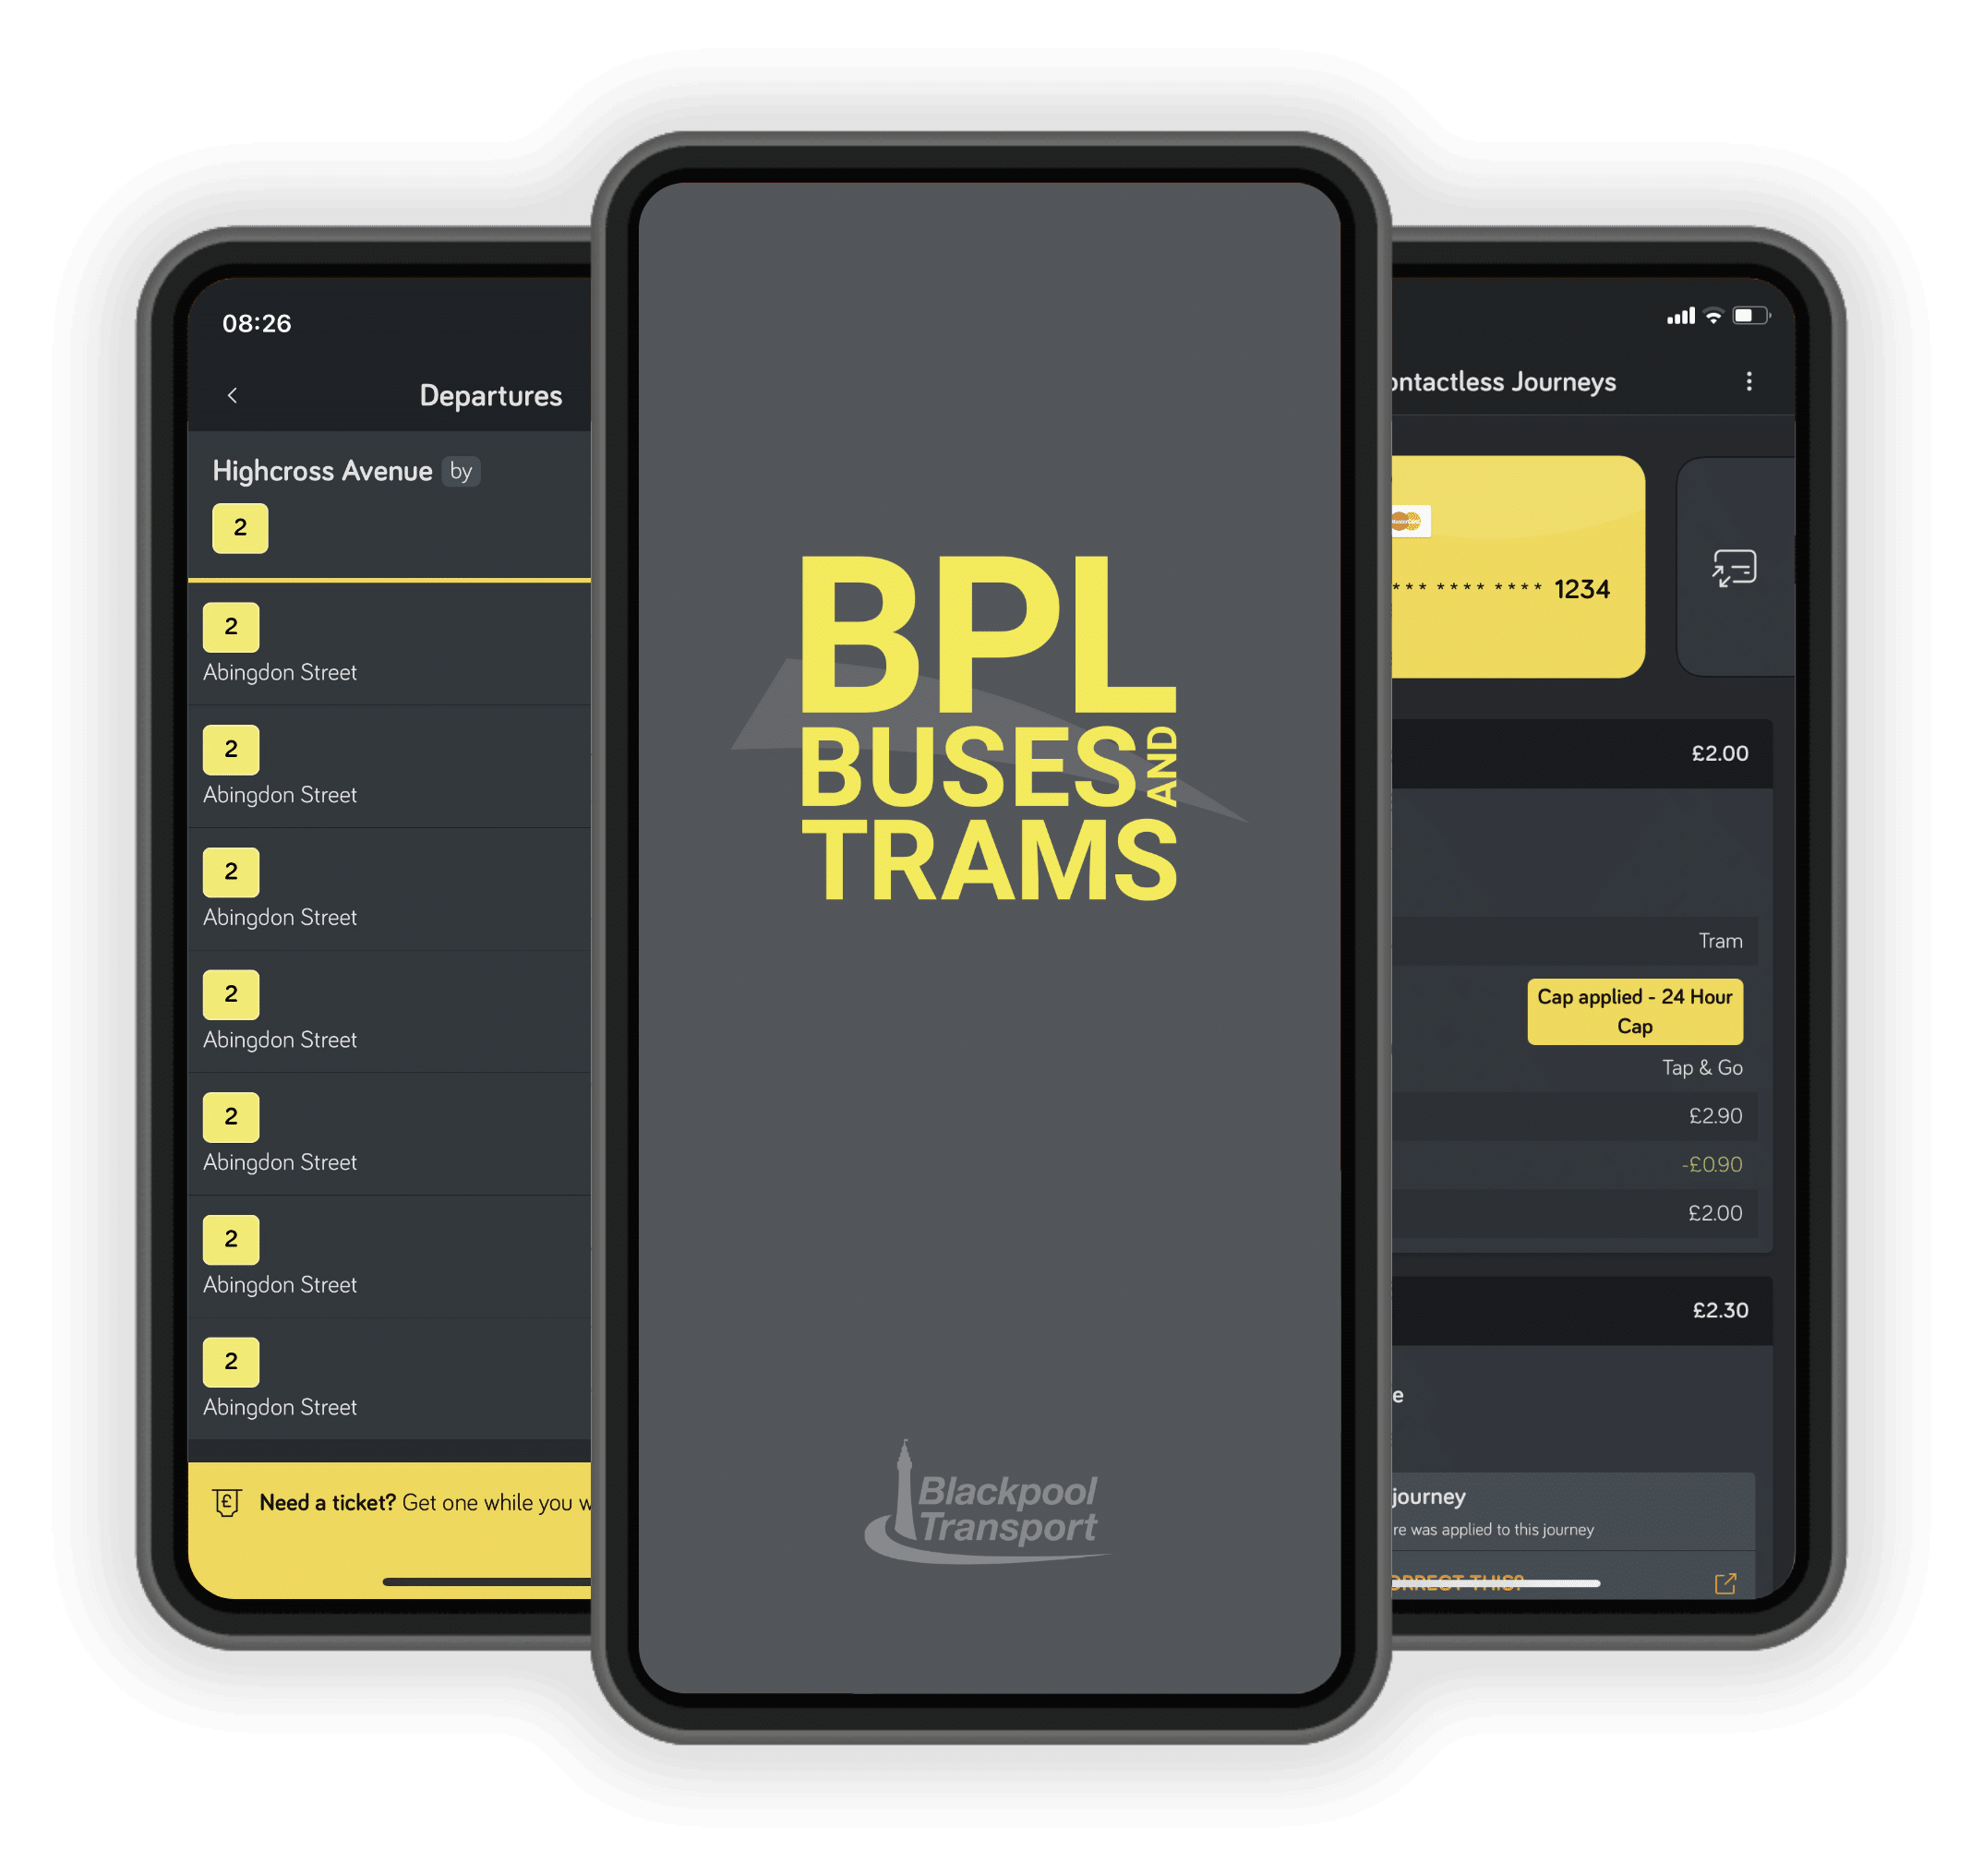 Blackpool Transport App screenshots; the splash screen, the departure board screen and the contactless journeys screen